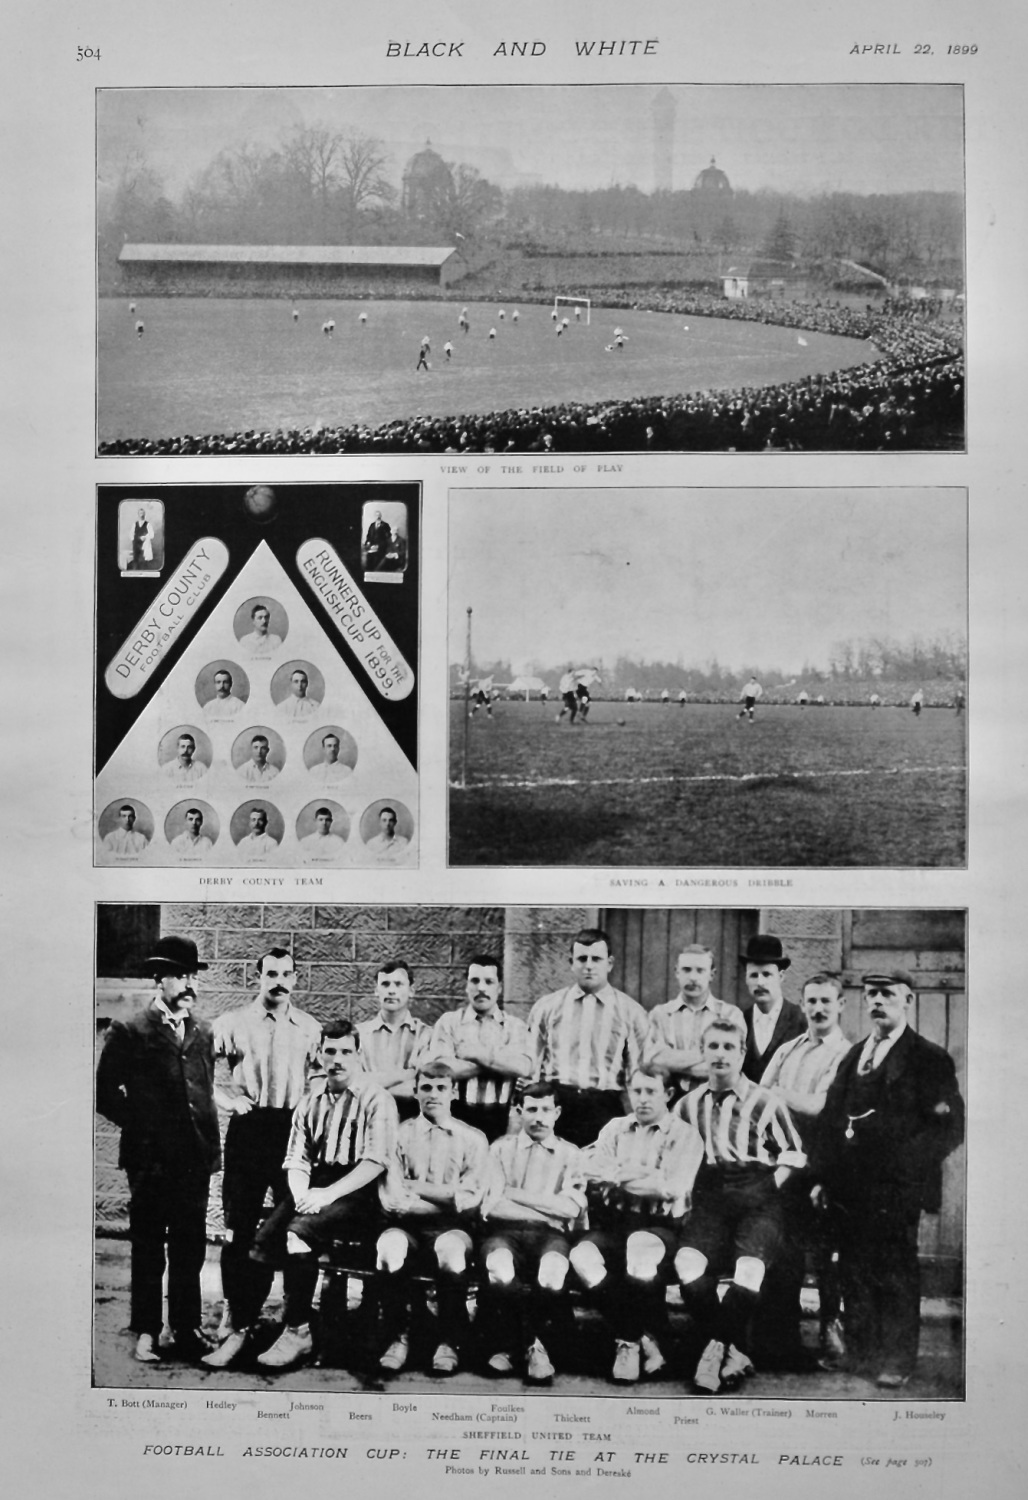 Football Association Cup :  The Final Tie at the Crystal Palace. 1899.  (Sh